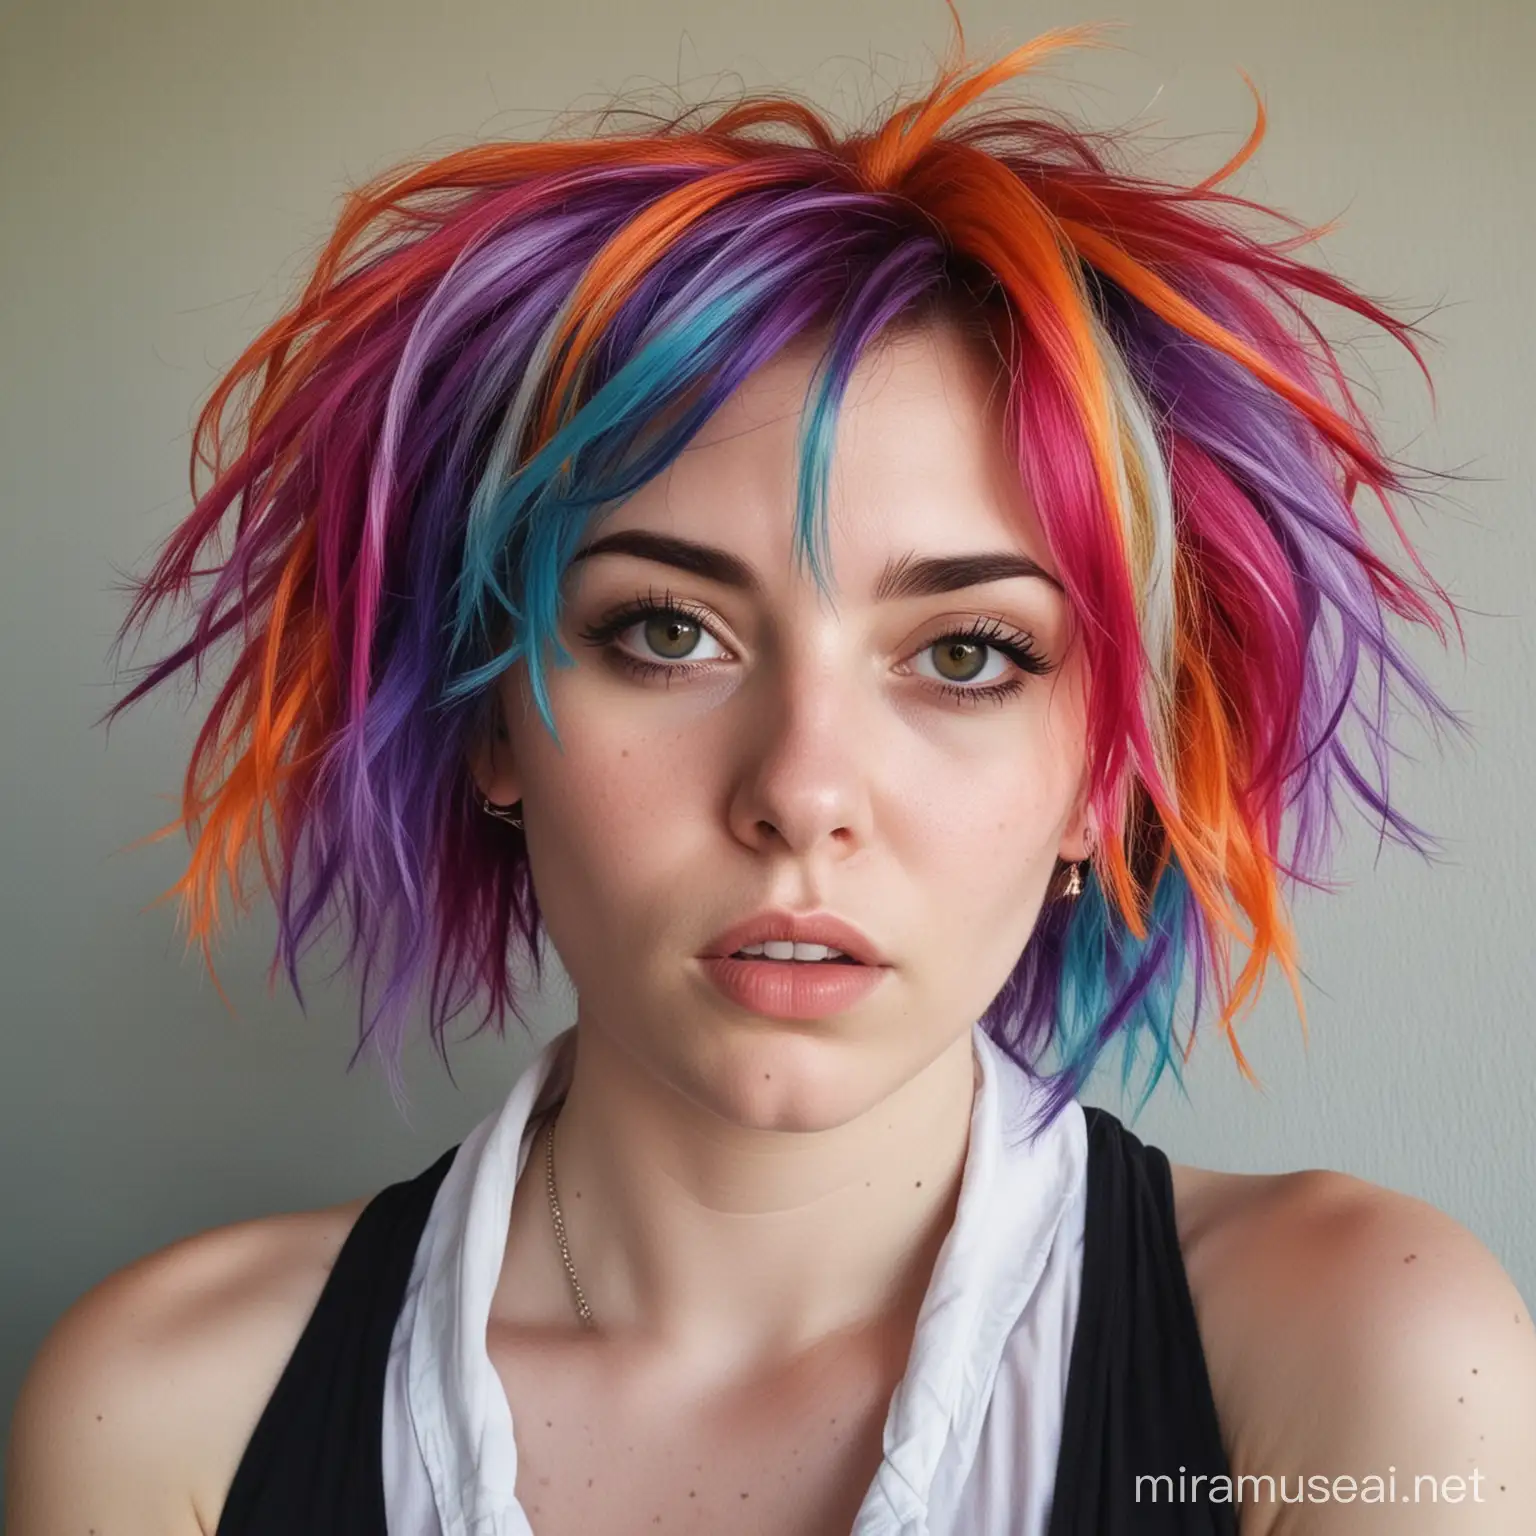 Colorful Poet with Eccentric Hairstyle